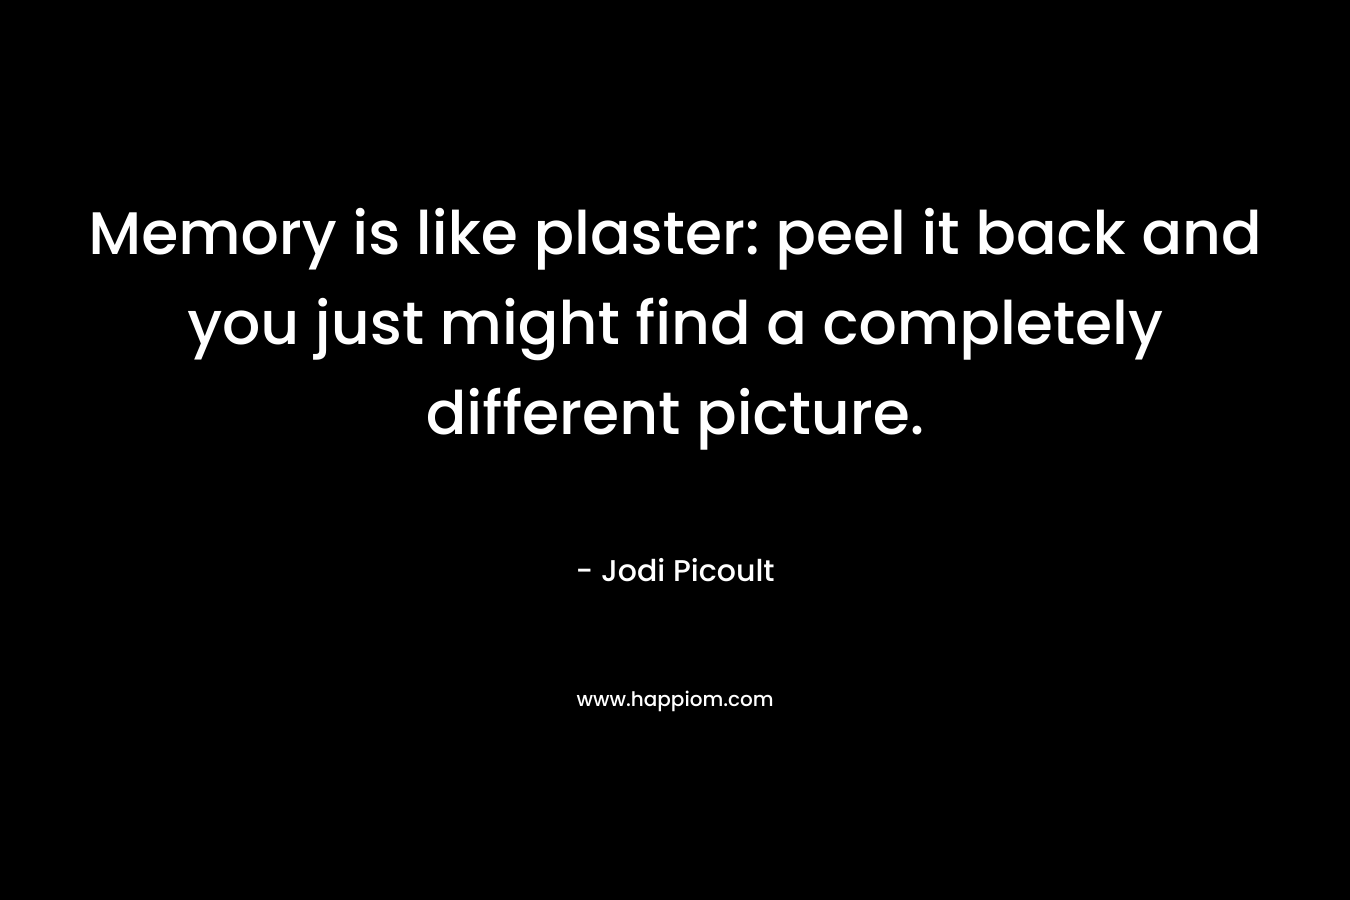 Memory is like plaster: peel it back and you just might find a completely different picture.